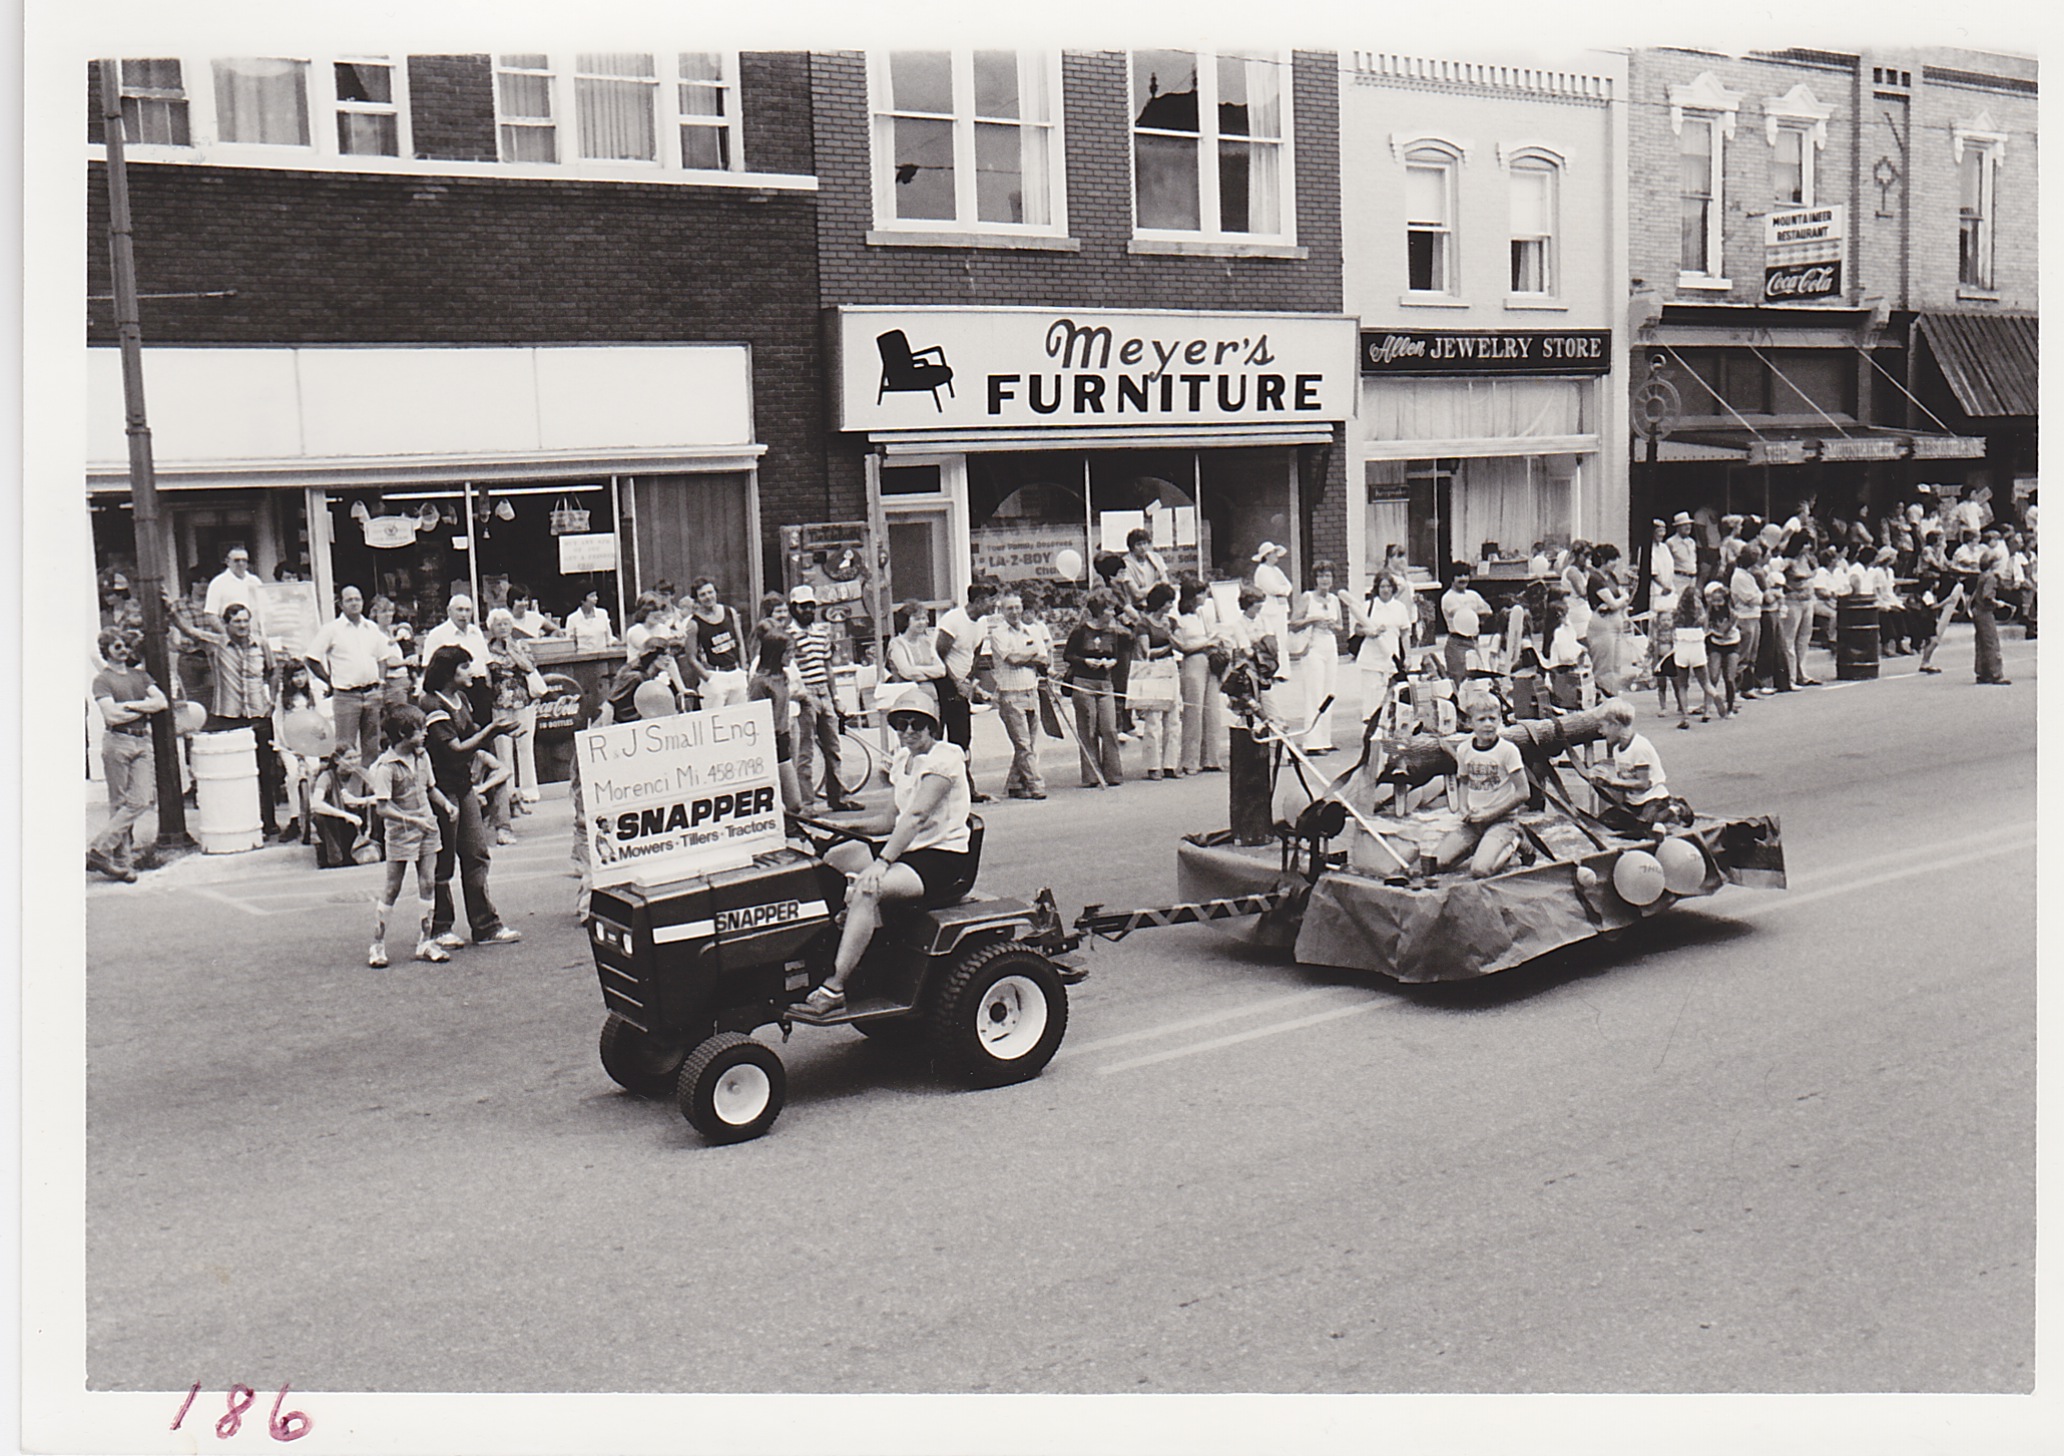 R & J Small Engine – Parade, Town and Country Festival, Aug. 15 and 16, 1980.  Jean Sholl on tractor, son Charles on wagon.